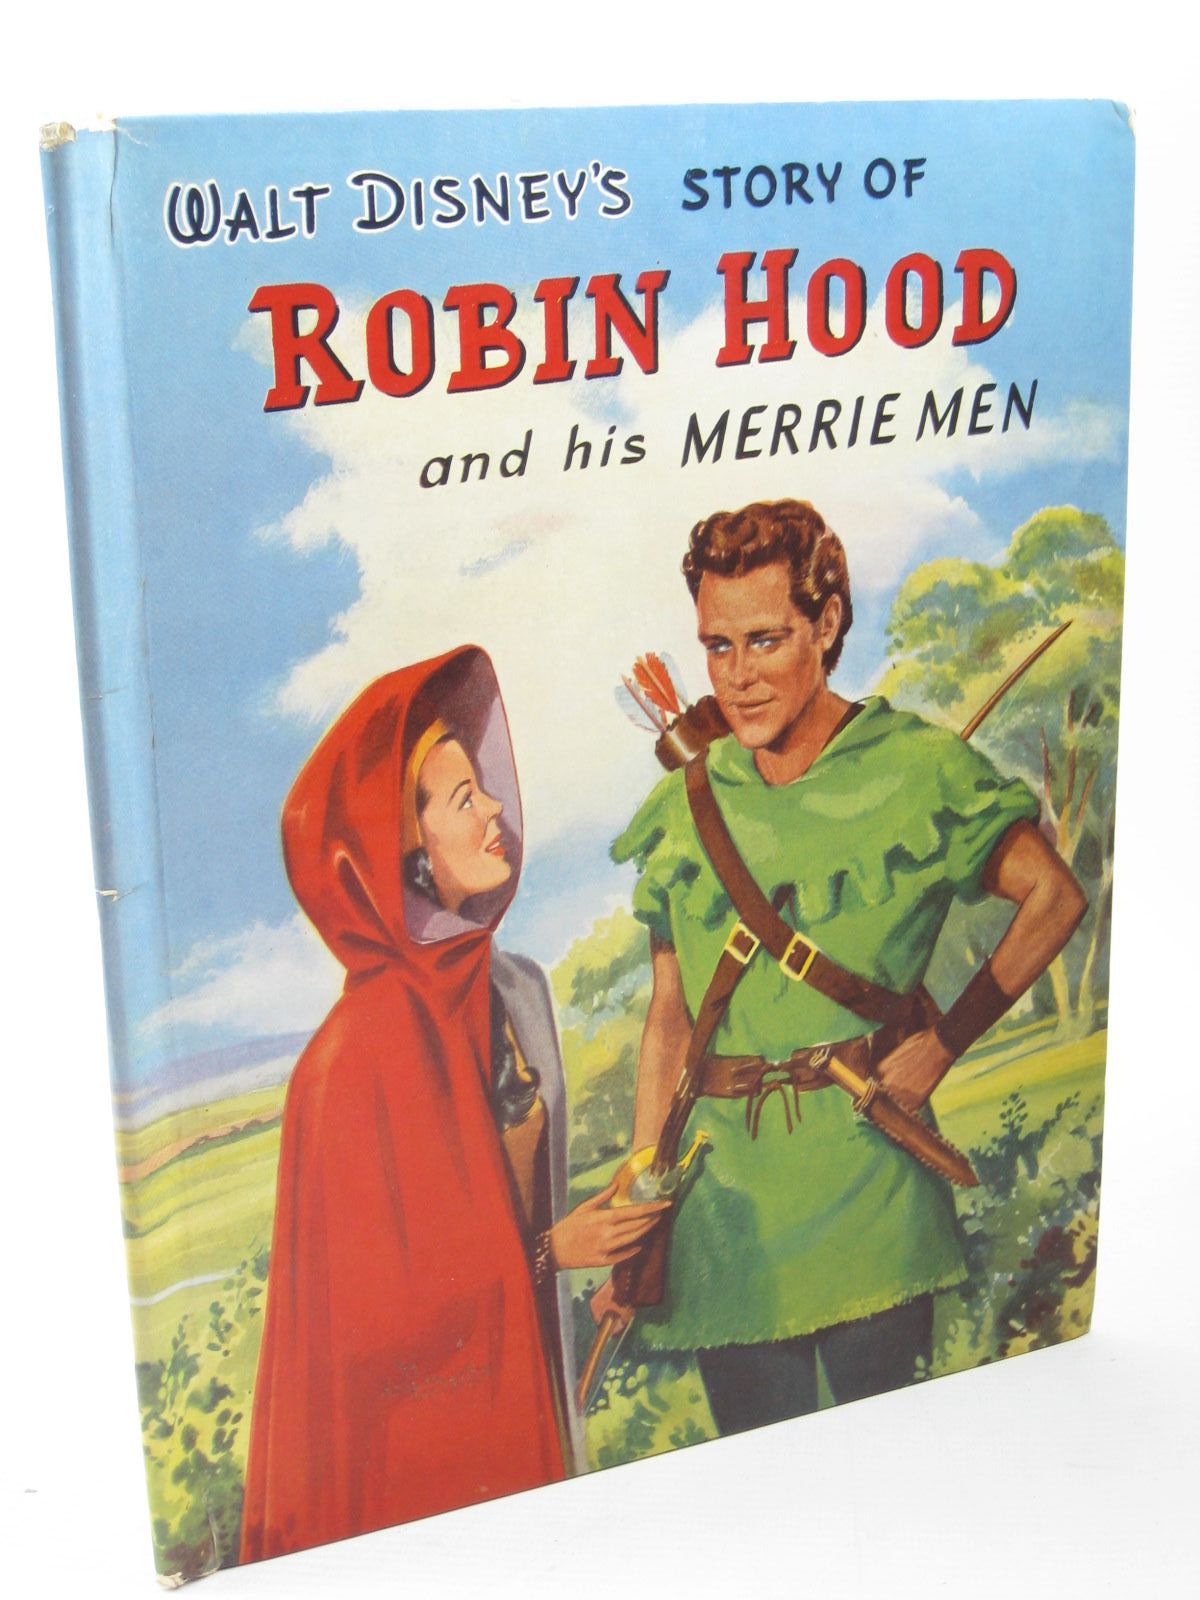 Image result for images of walt disney's the story of robin hood and his merrie men